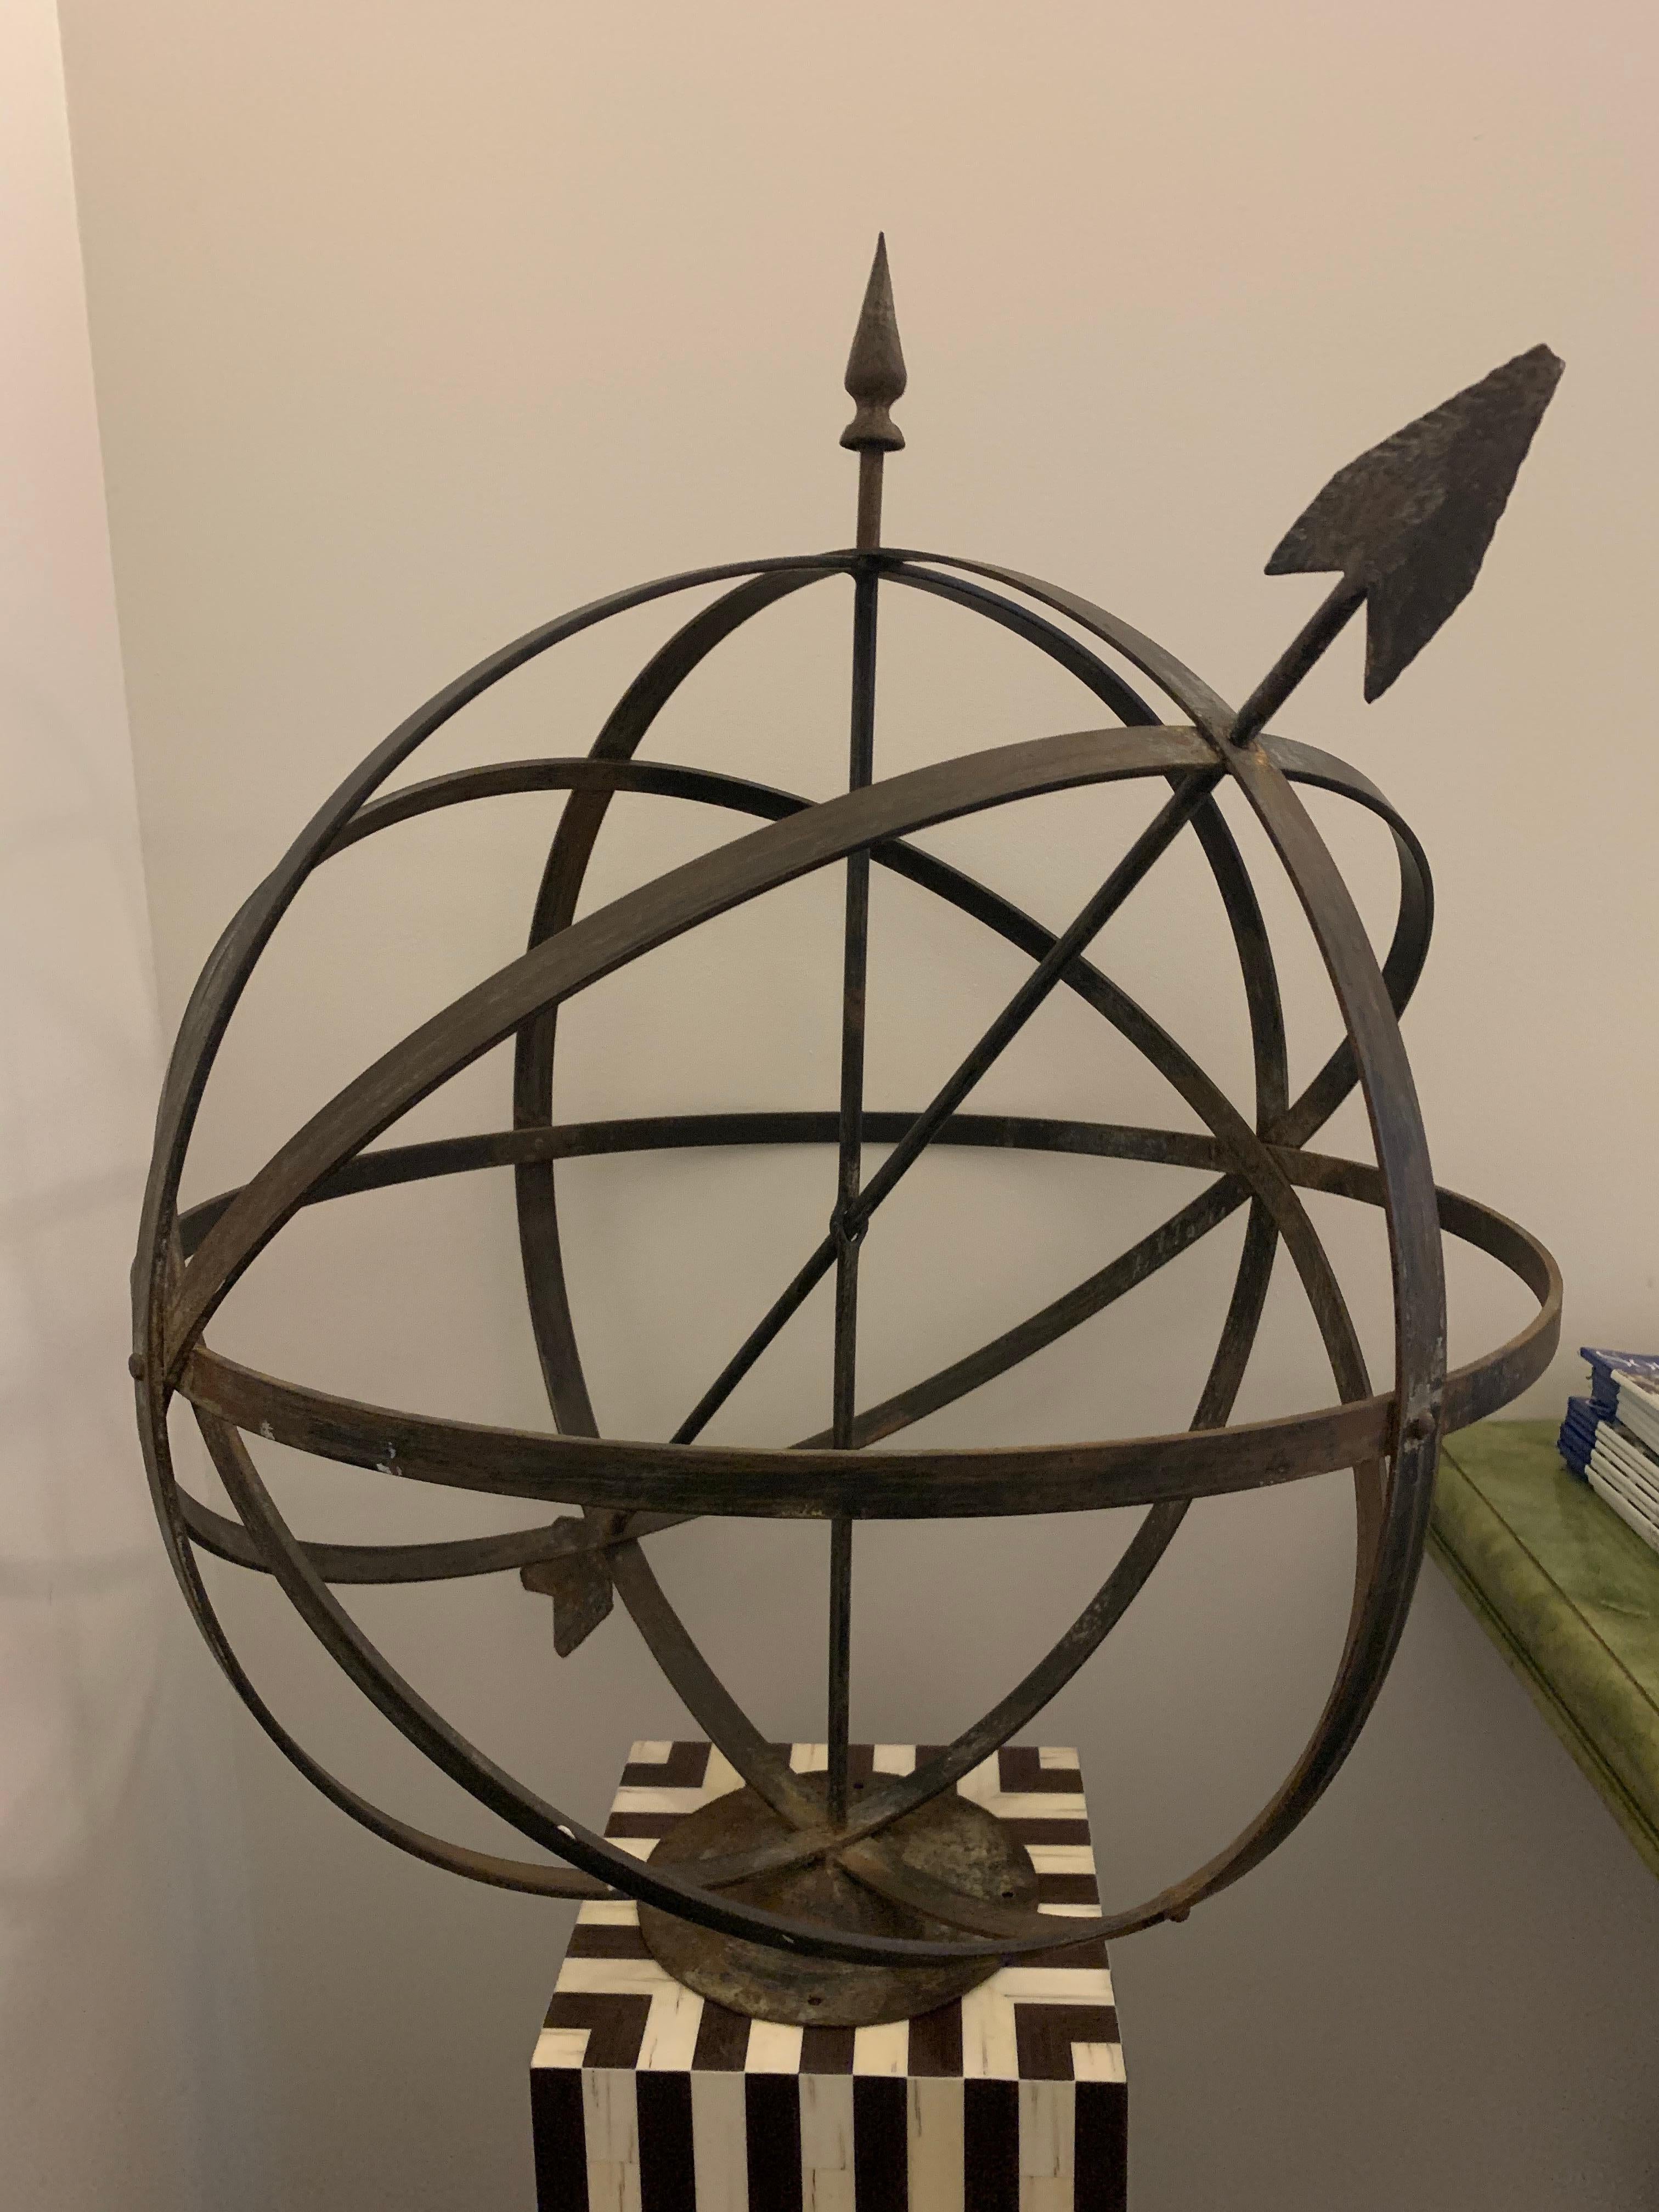 Iron sphere garden ornament. 

Property from esteemed interior designer Juan Montoya. Juan Montoya is one of the most acclaimed and prolific interior designers in the world today. Juan Montoya was born and spent his early years in Colombia. After